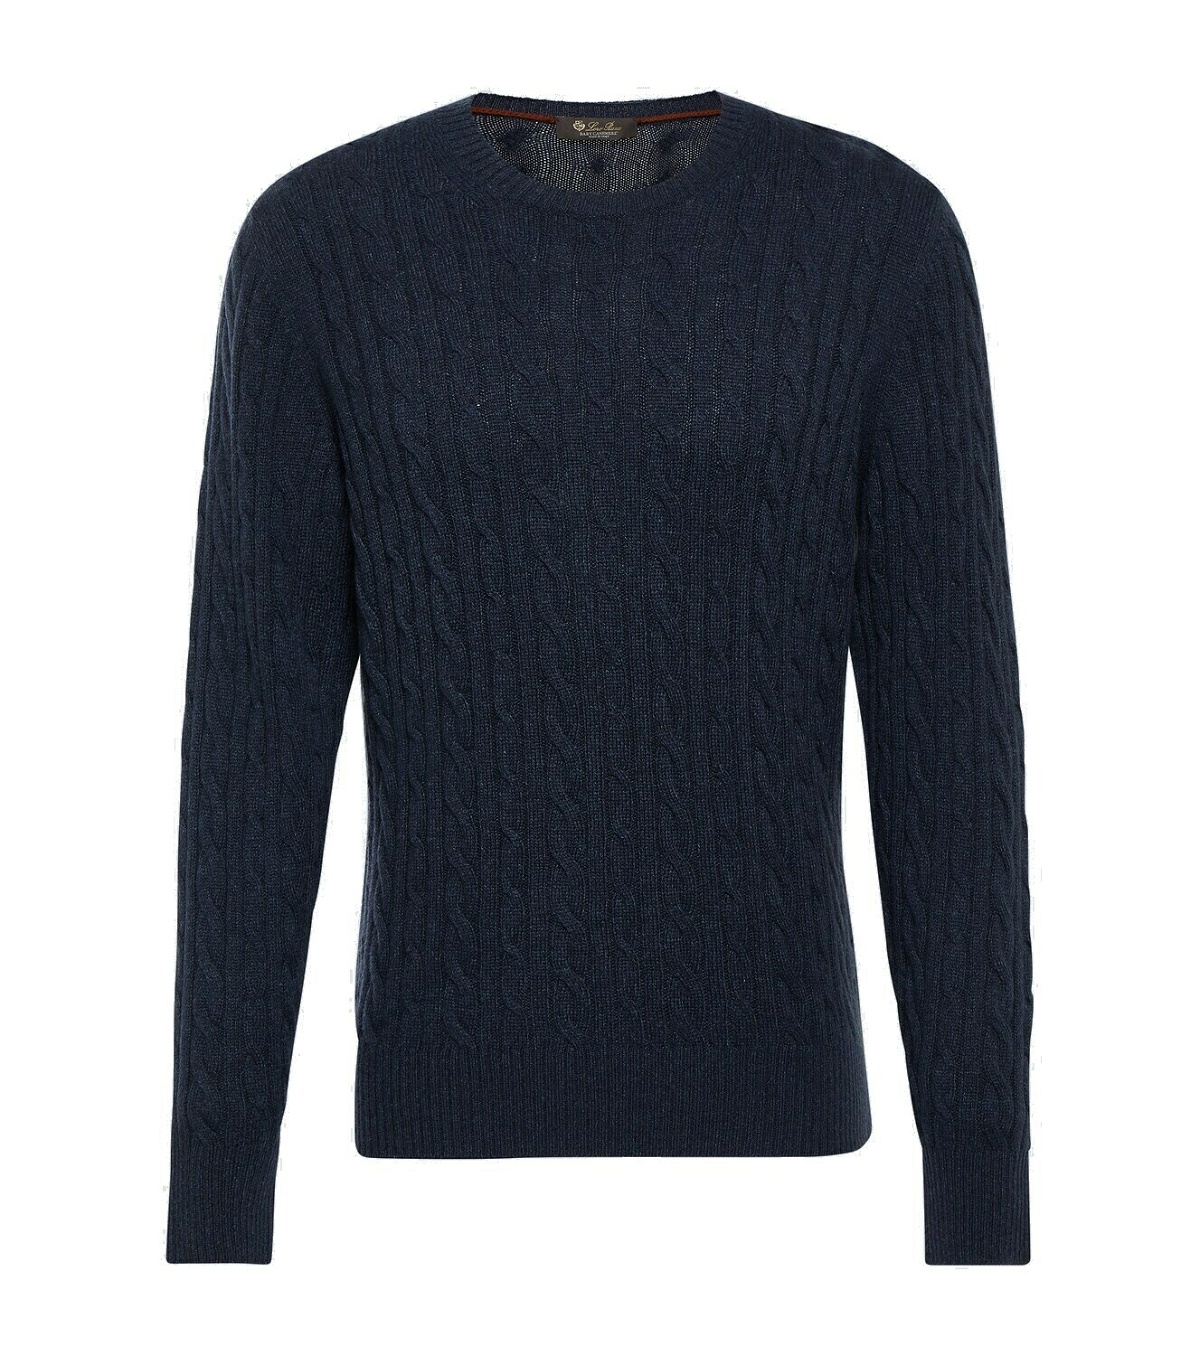 Loro Piana - Slim-Fit Striped Cable-Knit Cotton and Cashmere-Blend ...